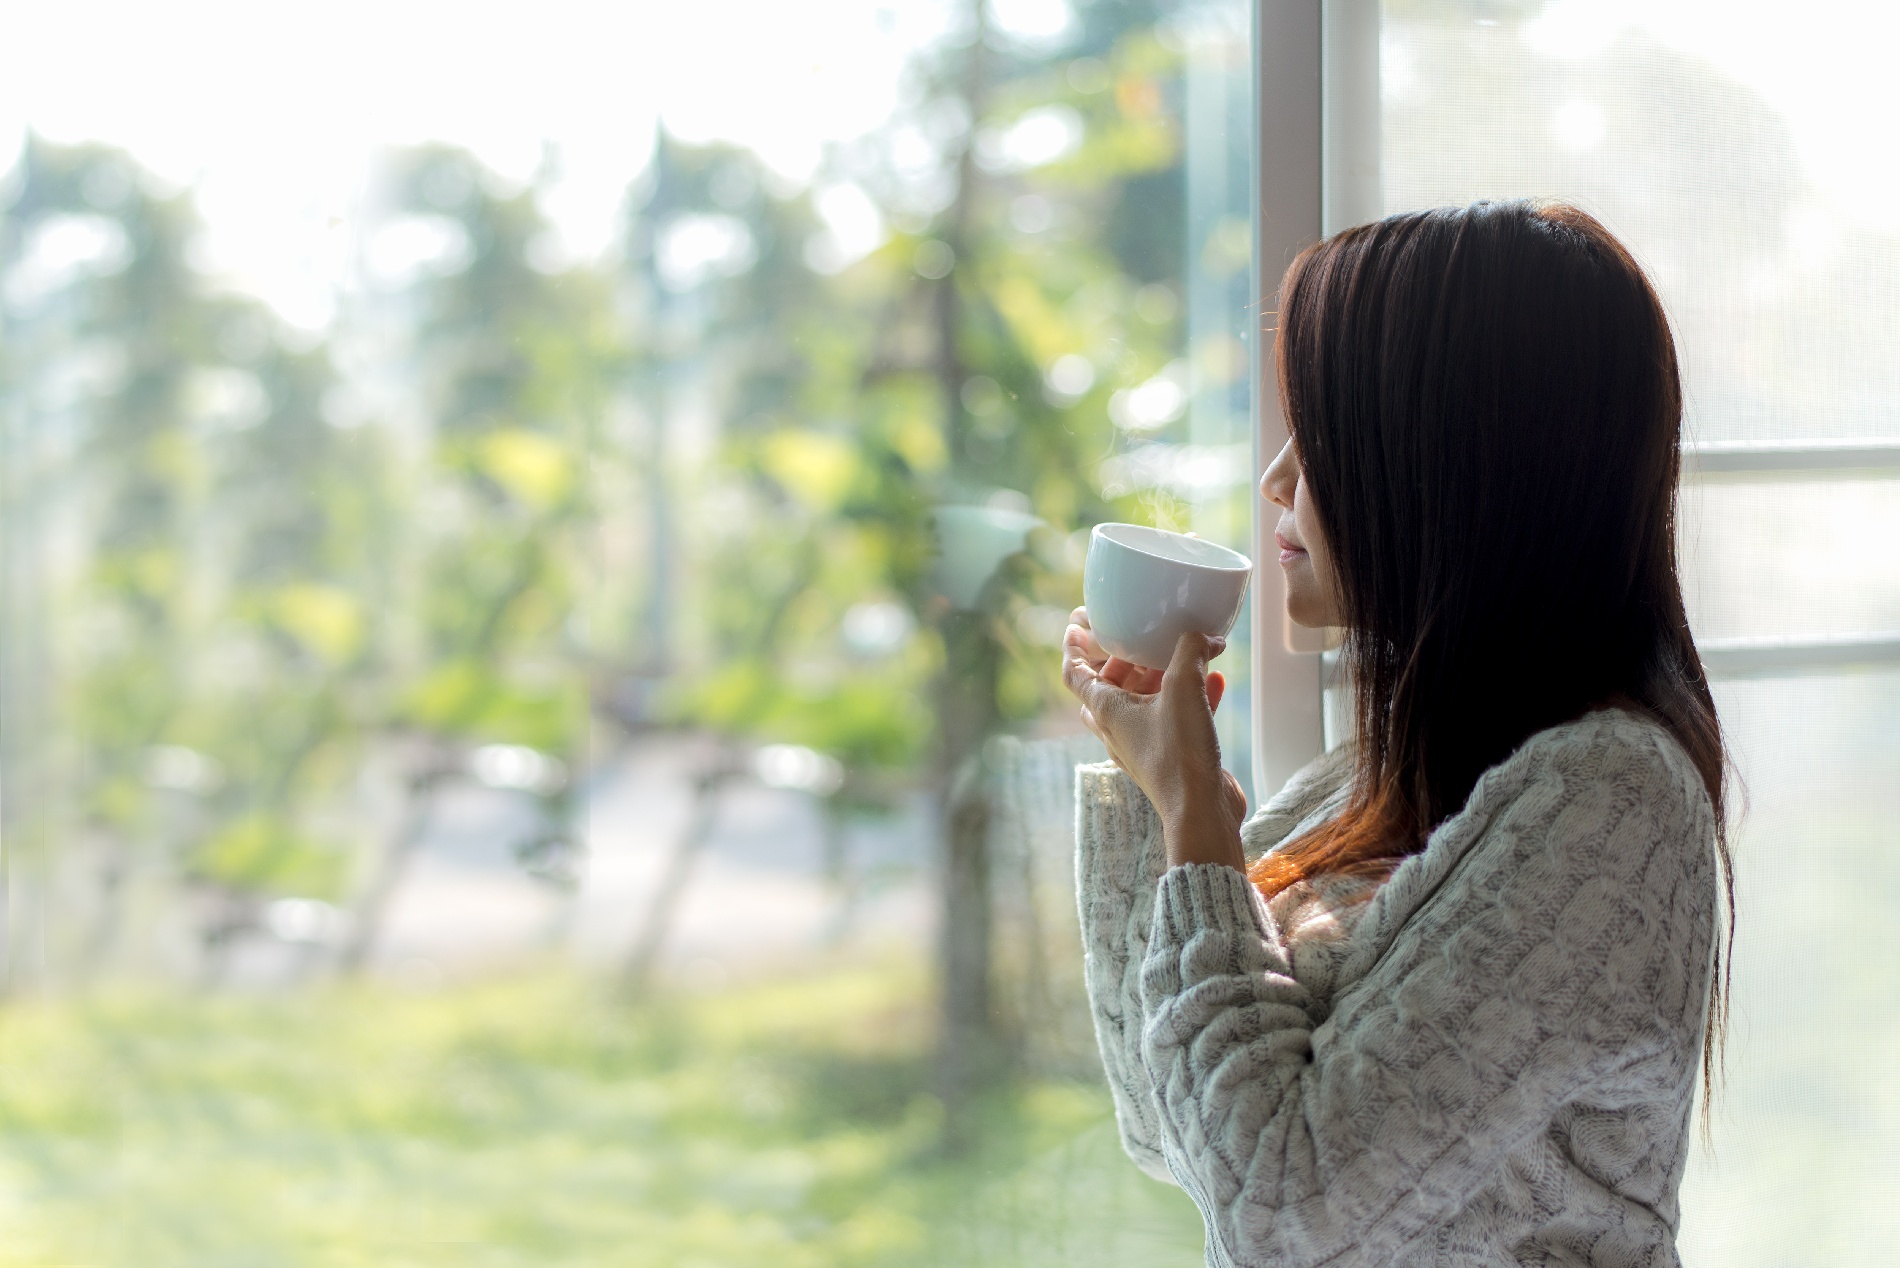 A woman holds a cup of coffee as she stares out of a window.